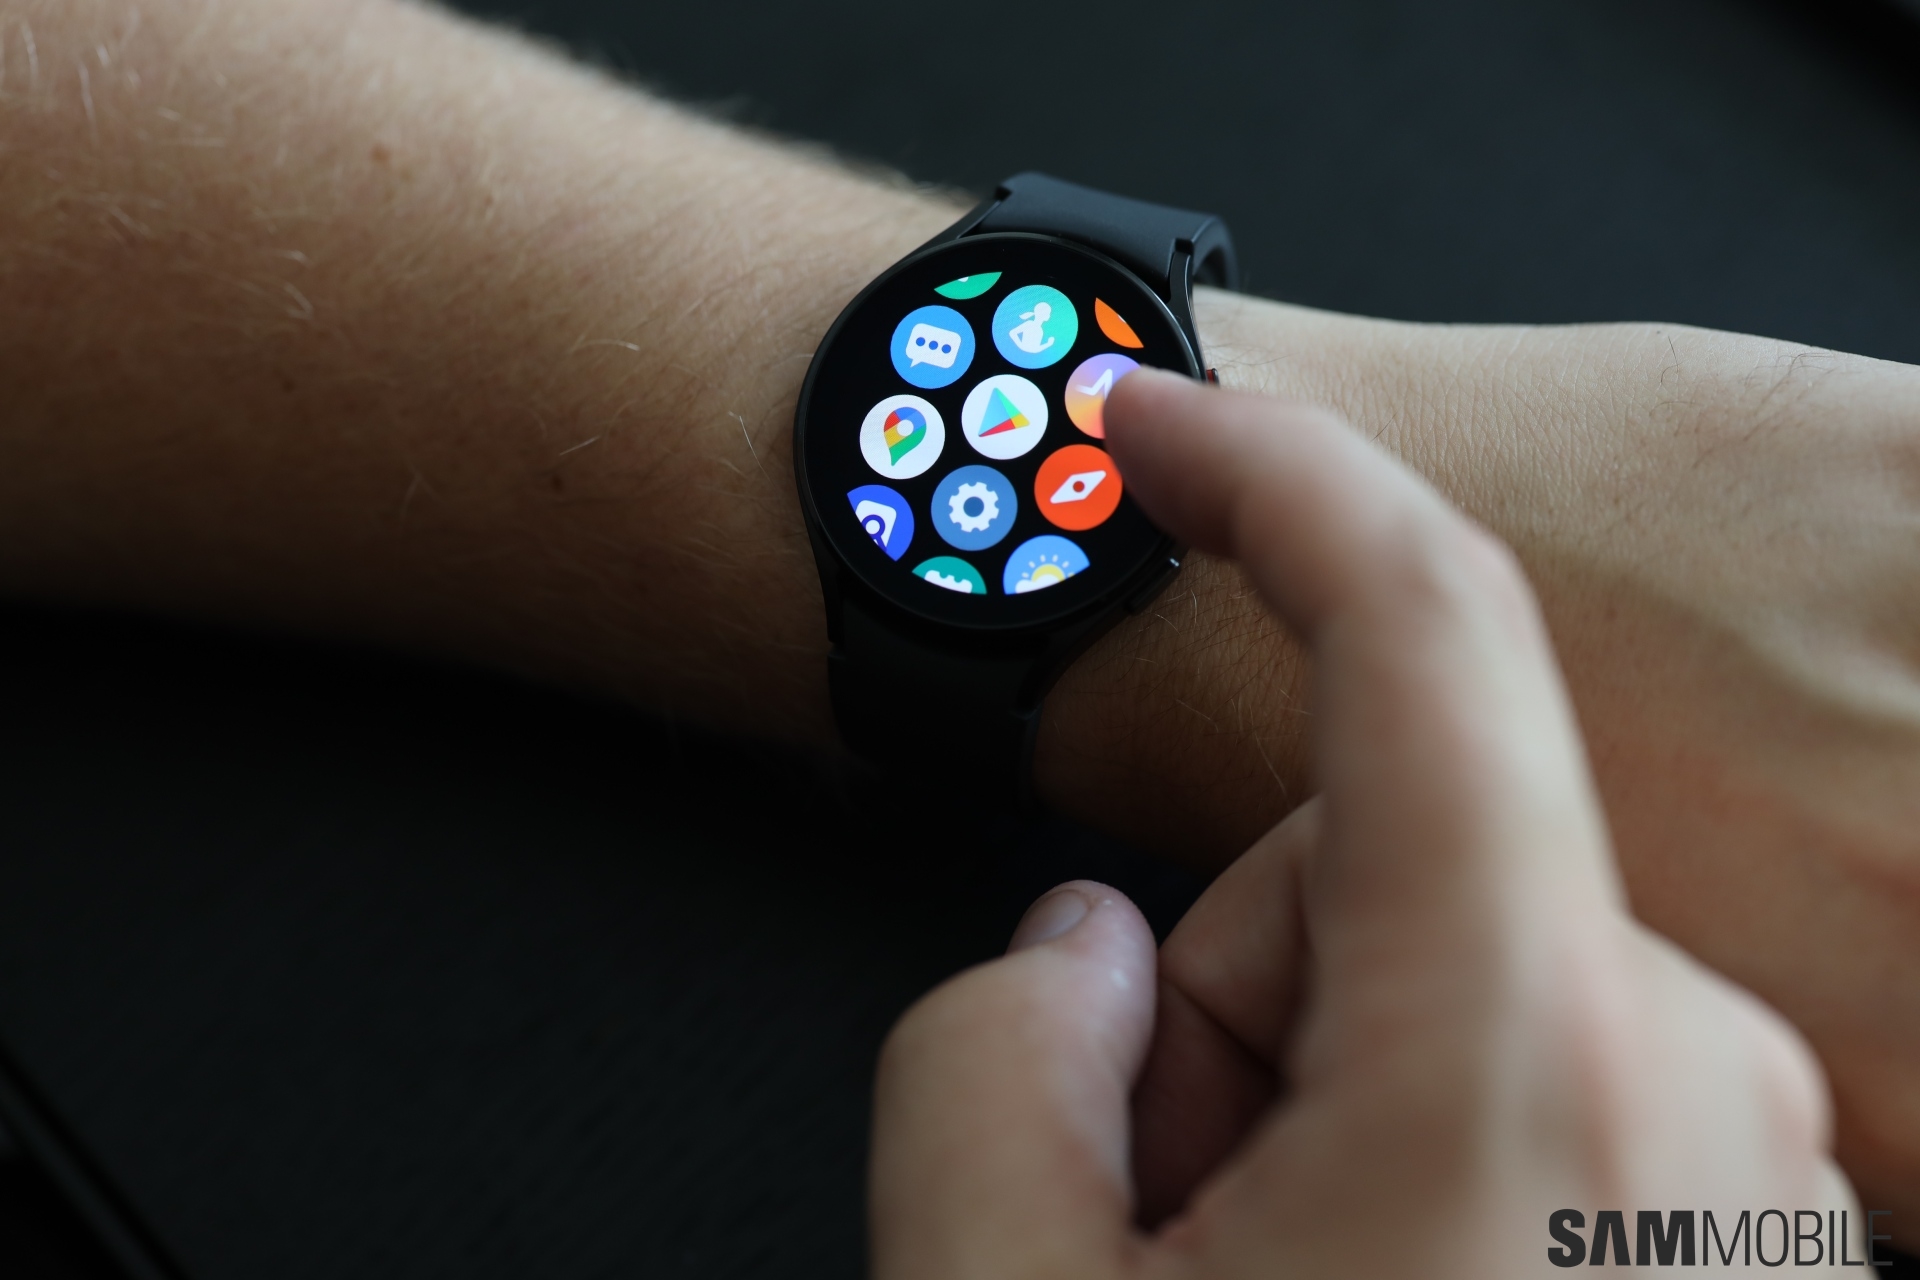 Galaxy Watch 4 gets the latest One UI Watch 5 update in the USA SamMobile